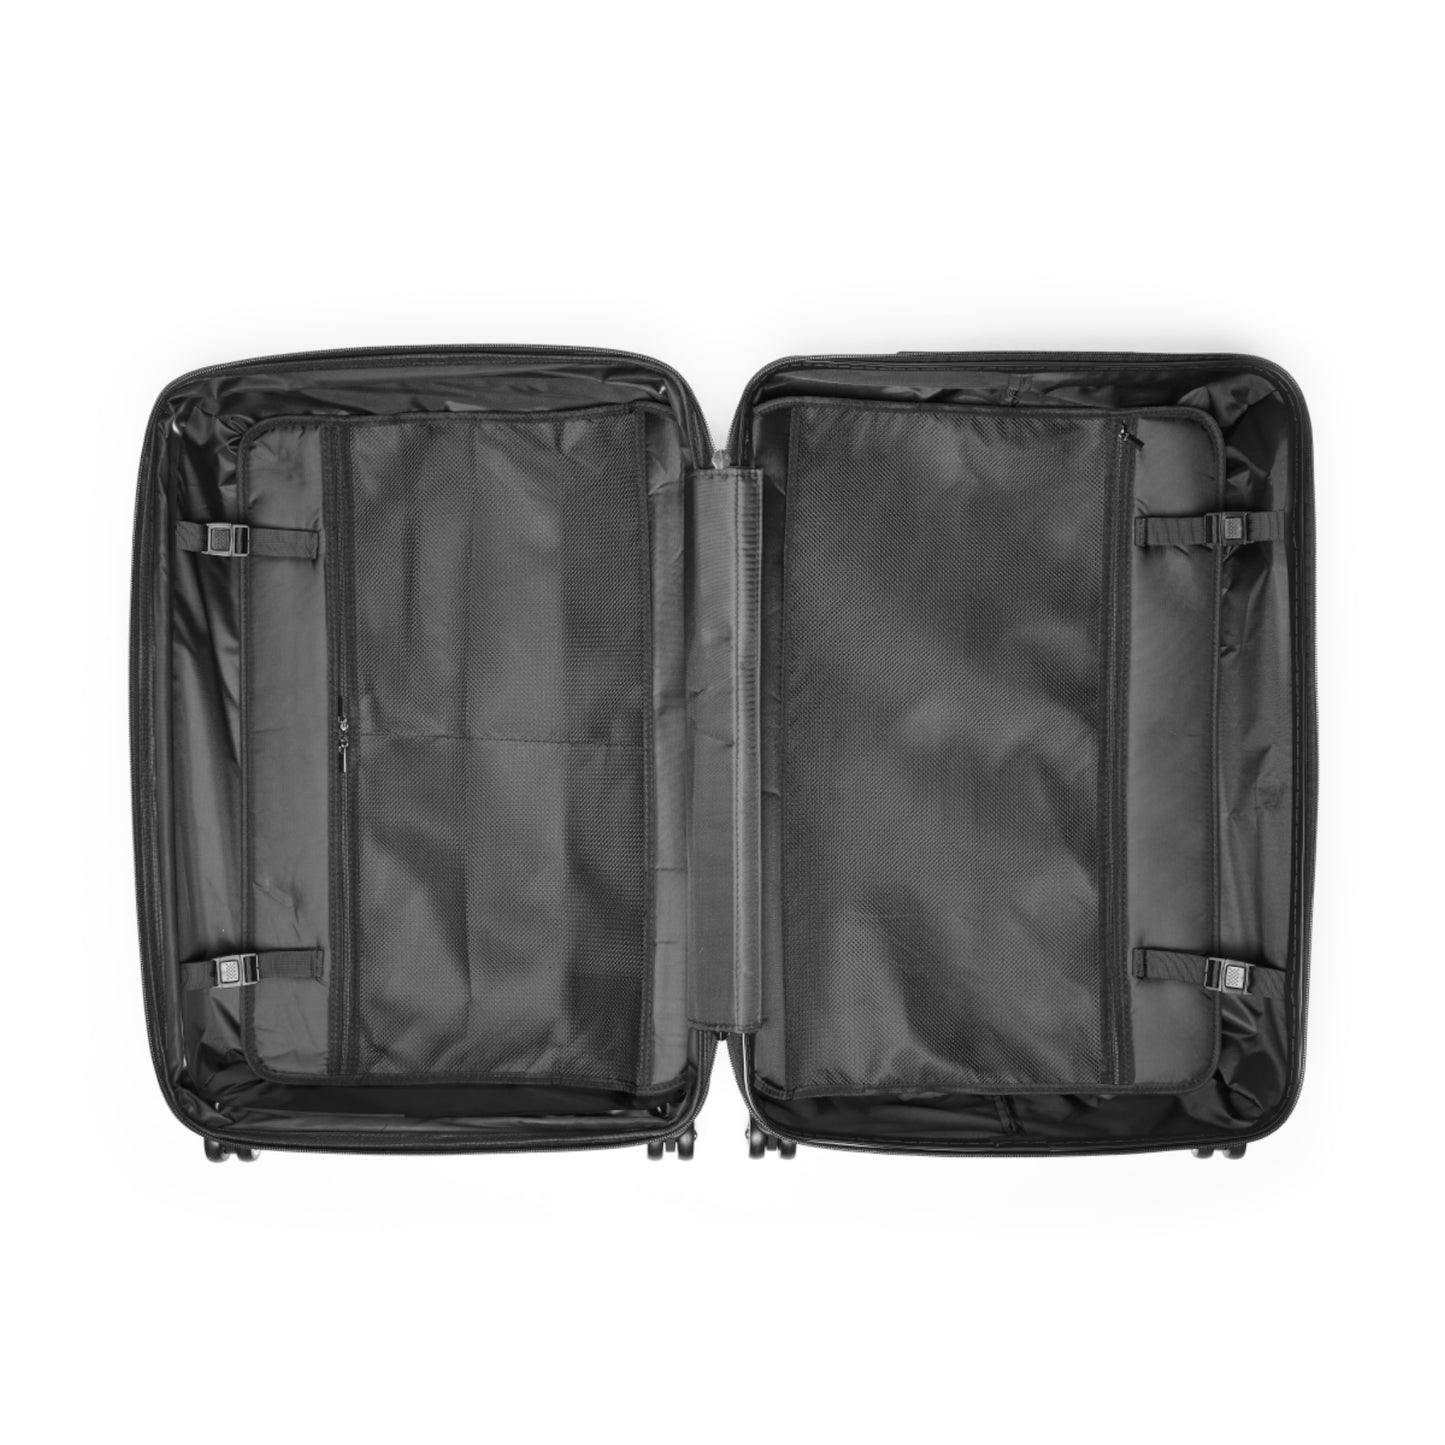 "Love" Wedding Suitcase-Carry on, Medium and Large